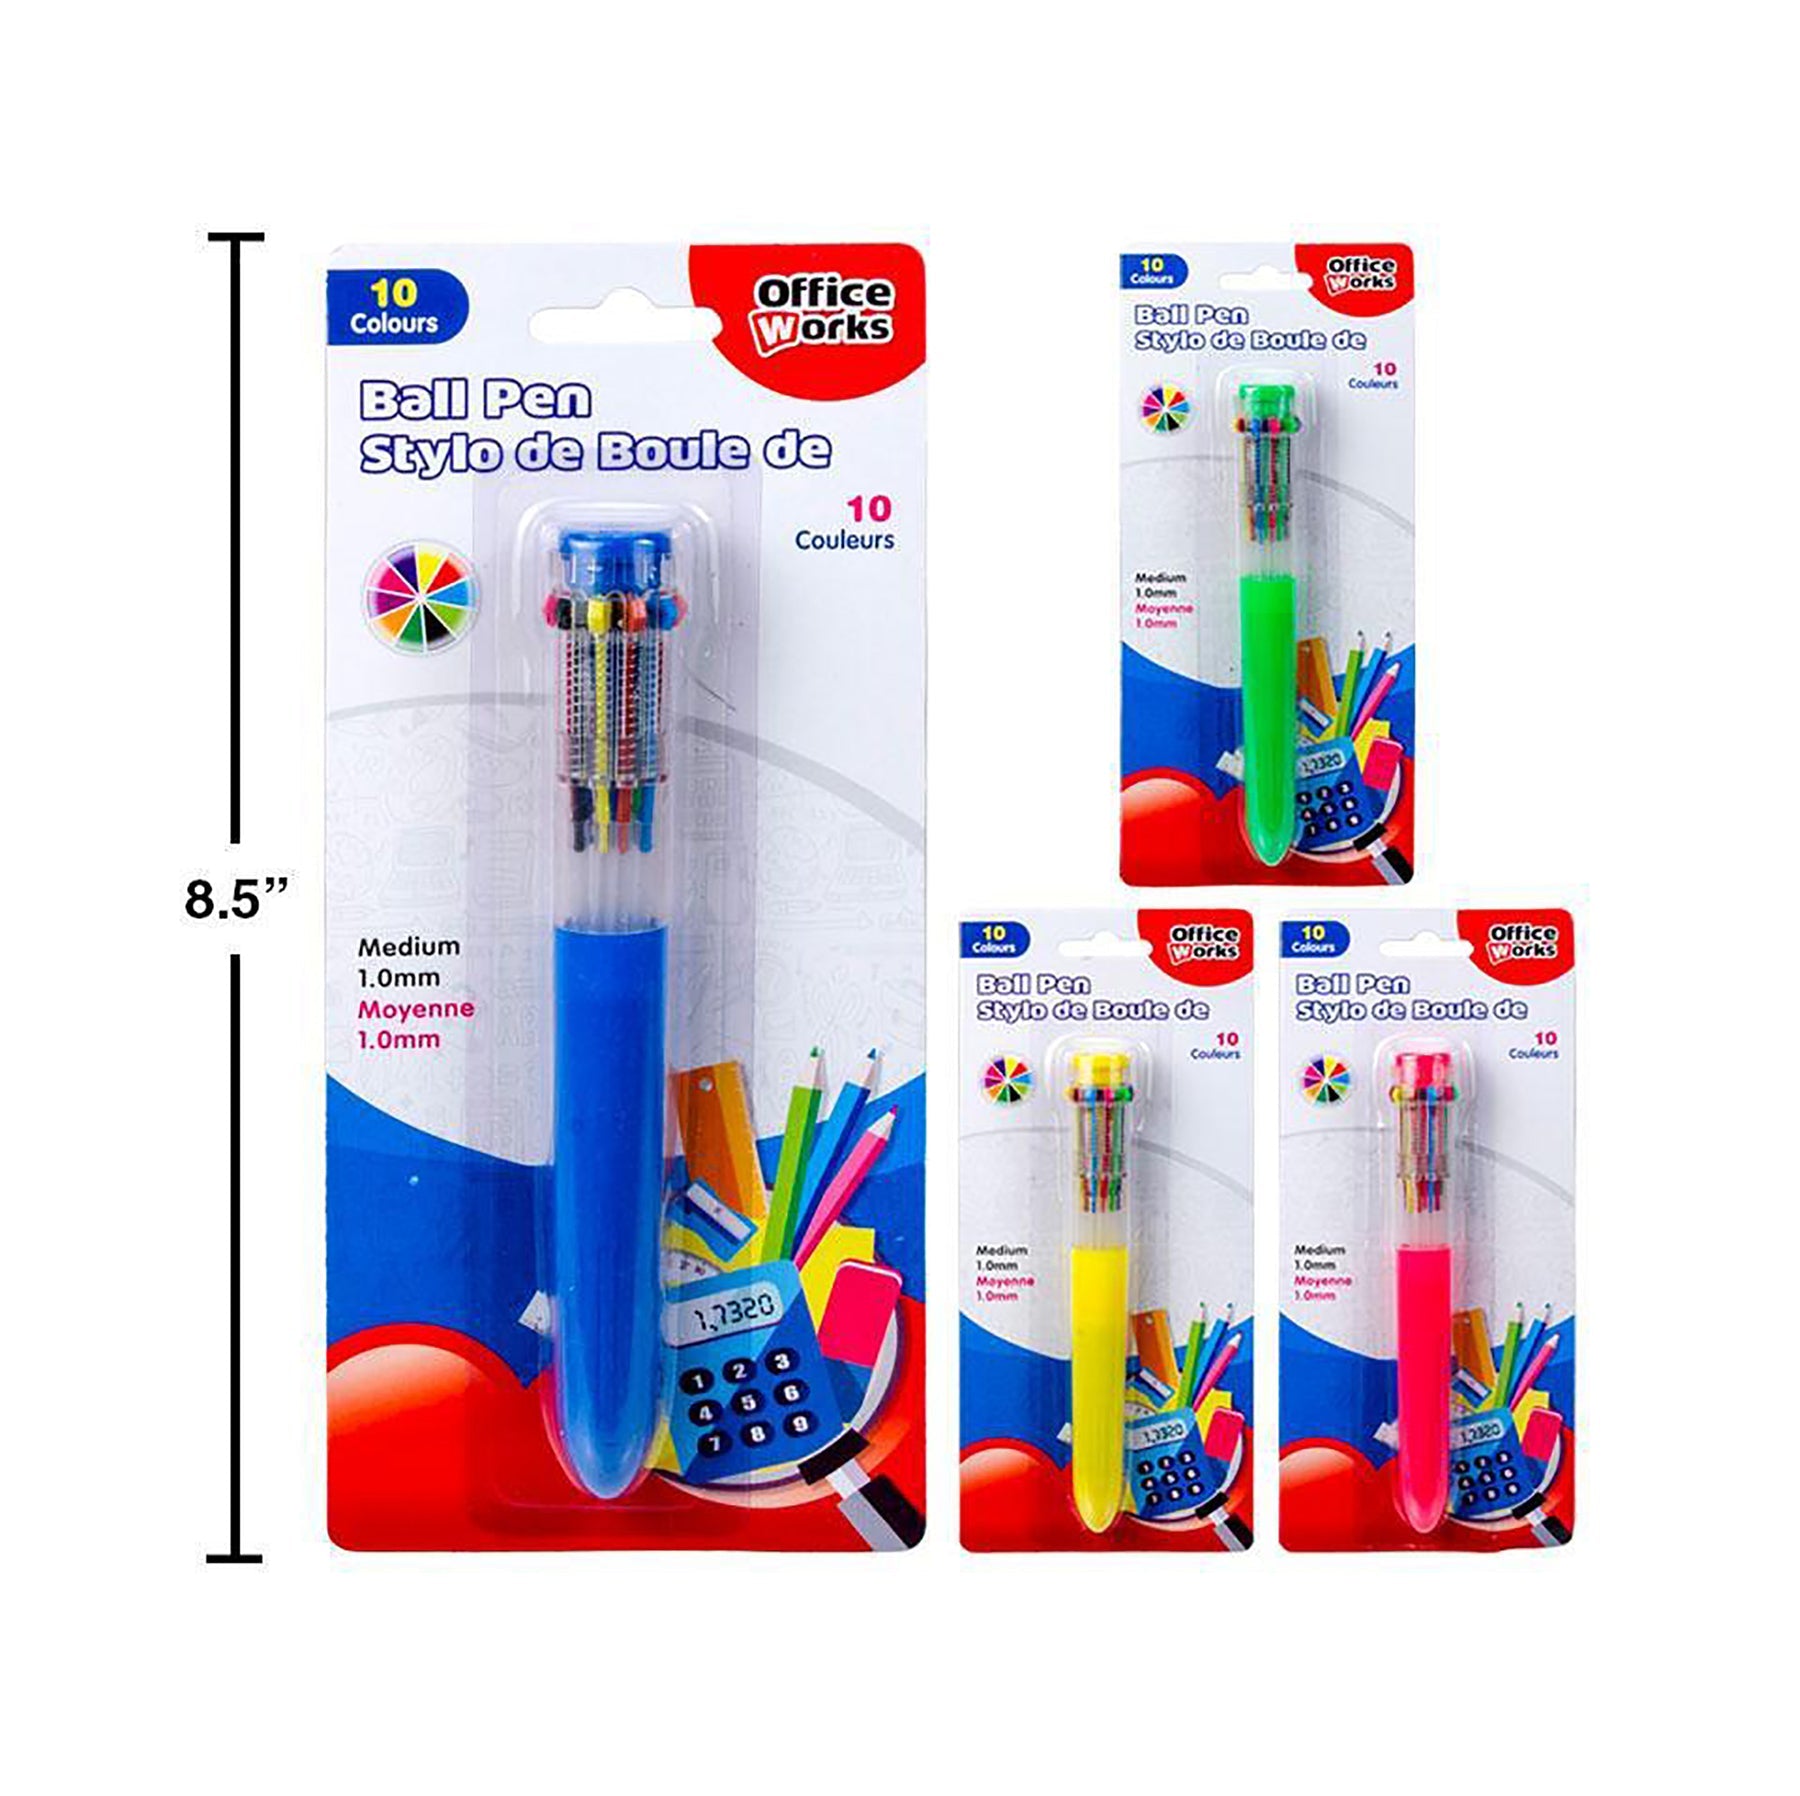 Office Works Ball Pen 10-Color of Ink Medium 1.0mm